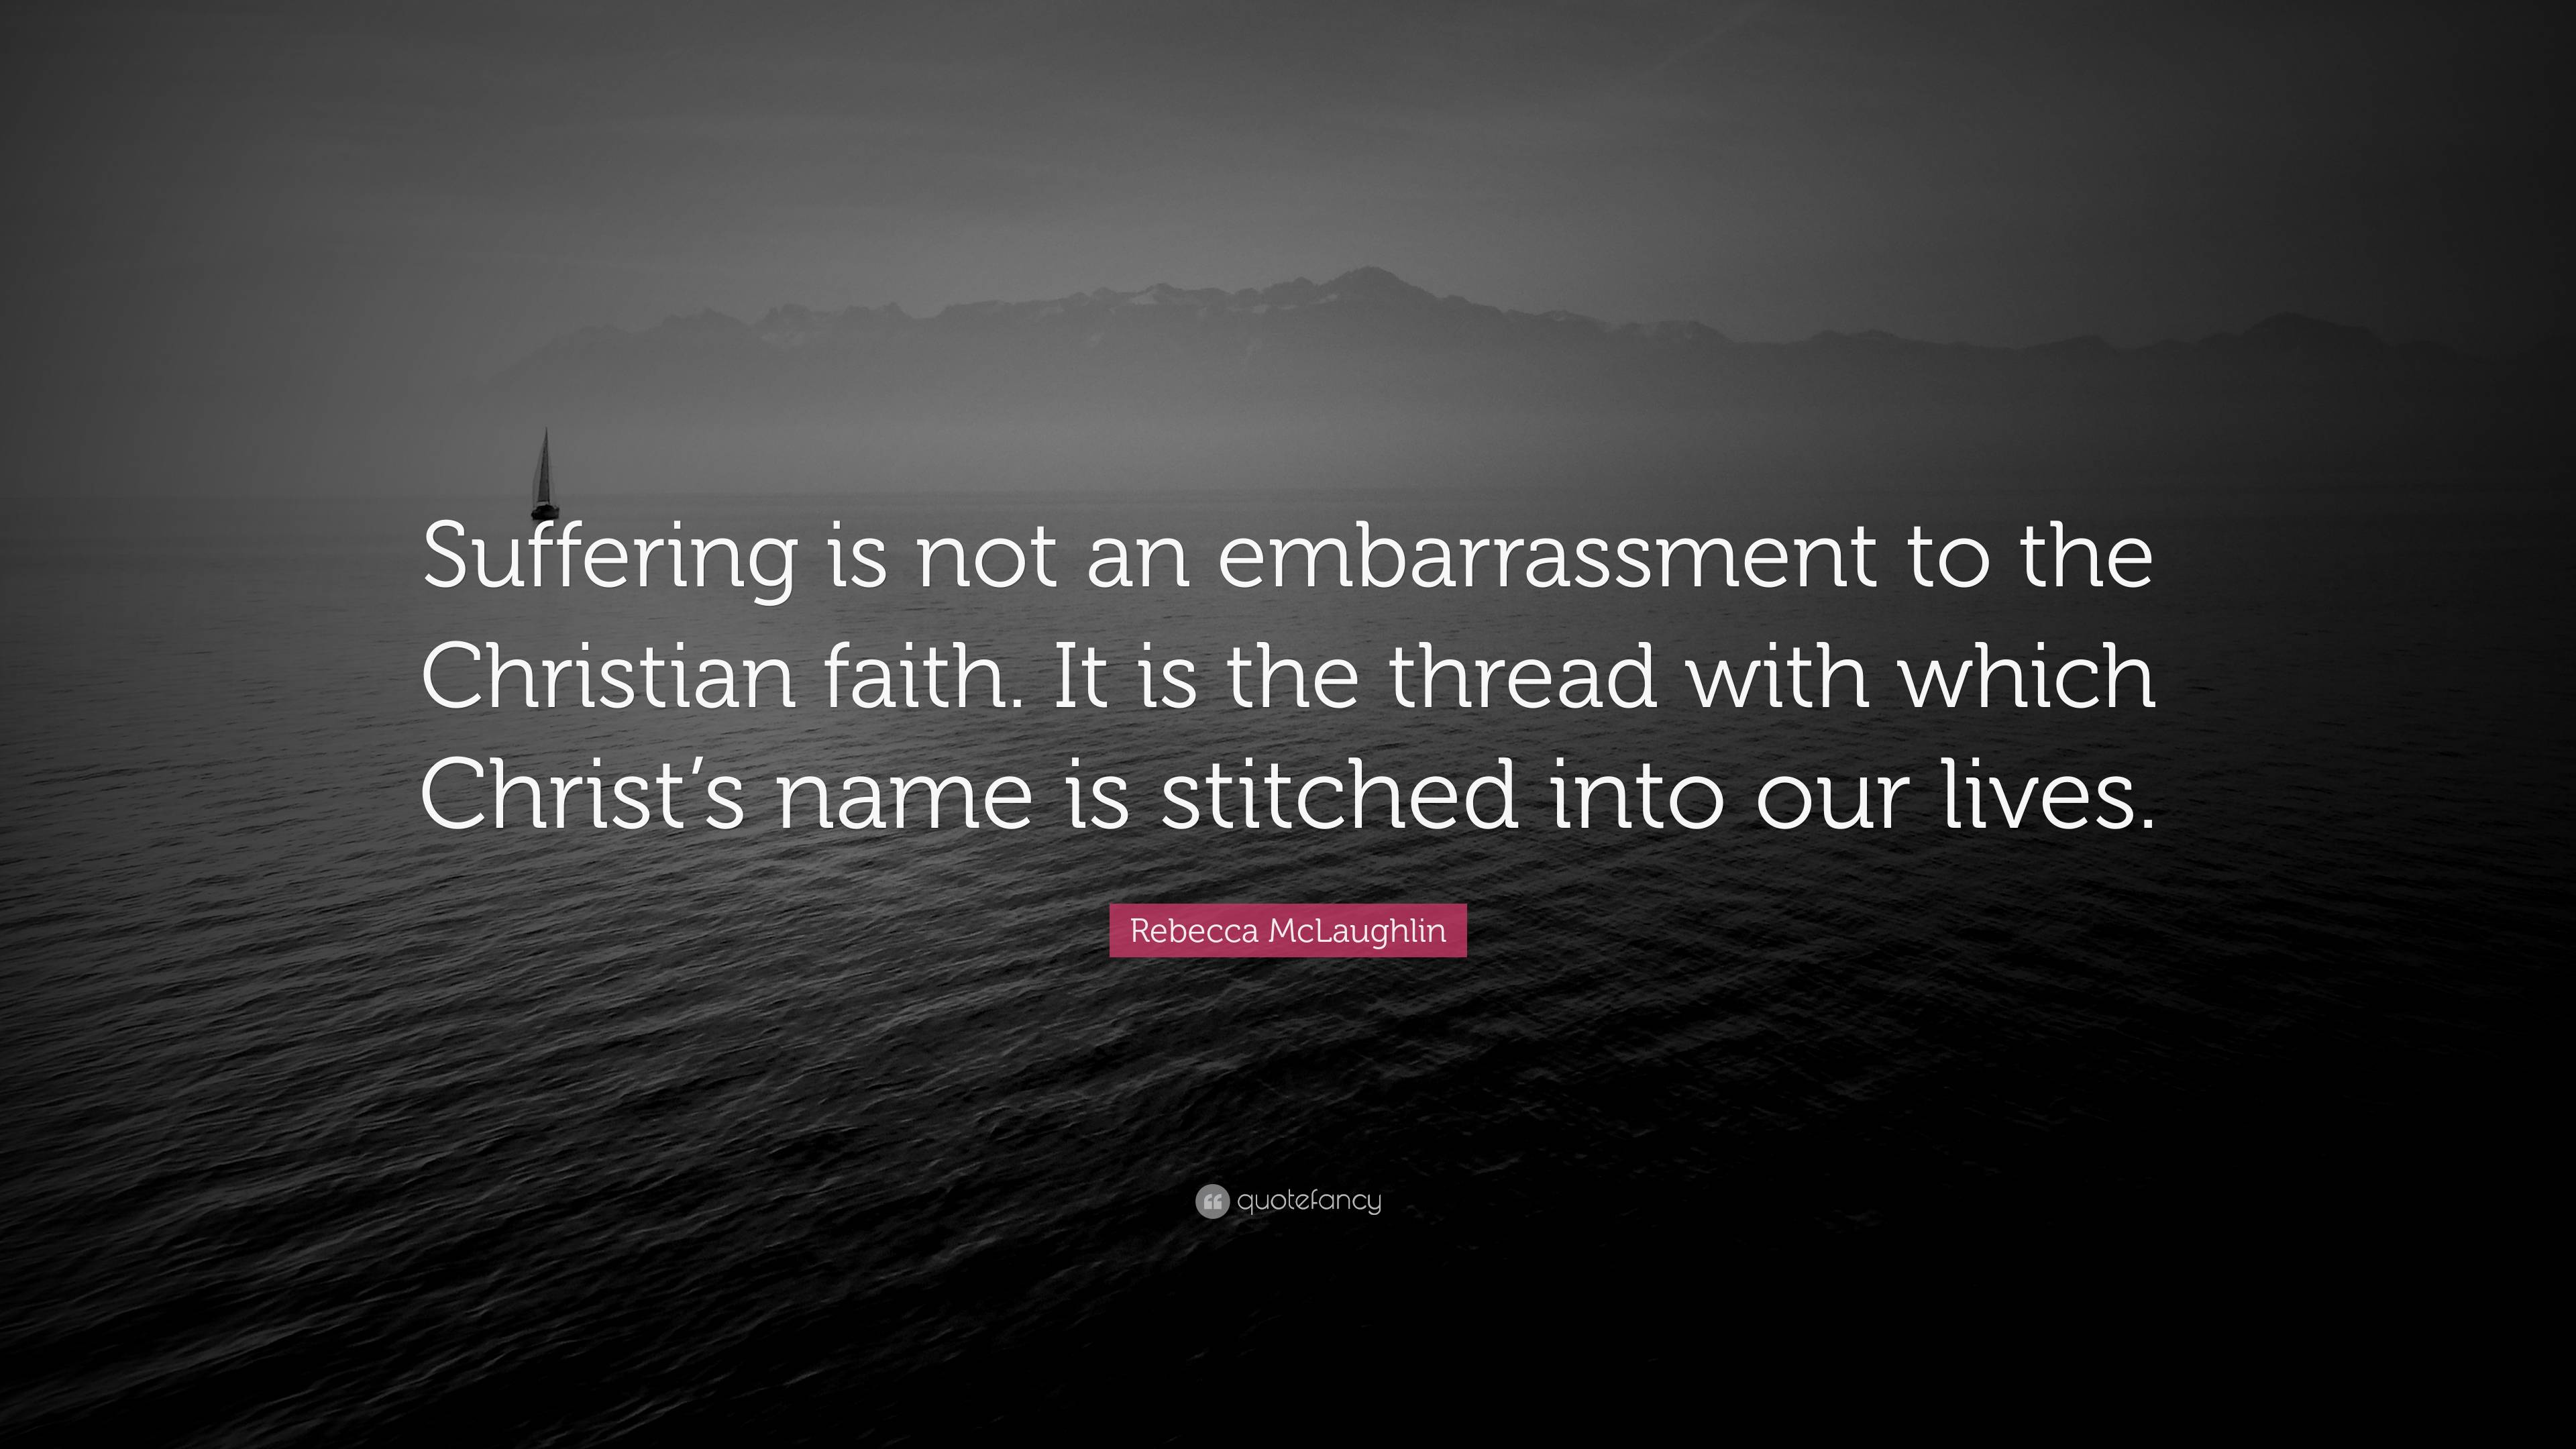 Rebecca McLaughlin Quote: “Suffering is not an embarrassment to the ...